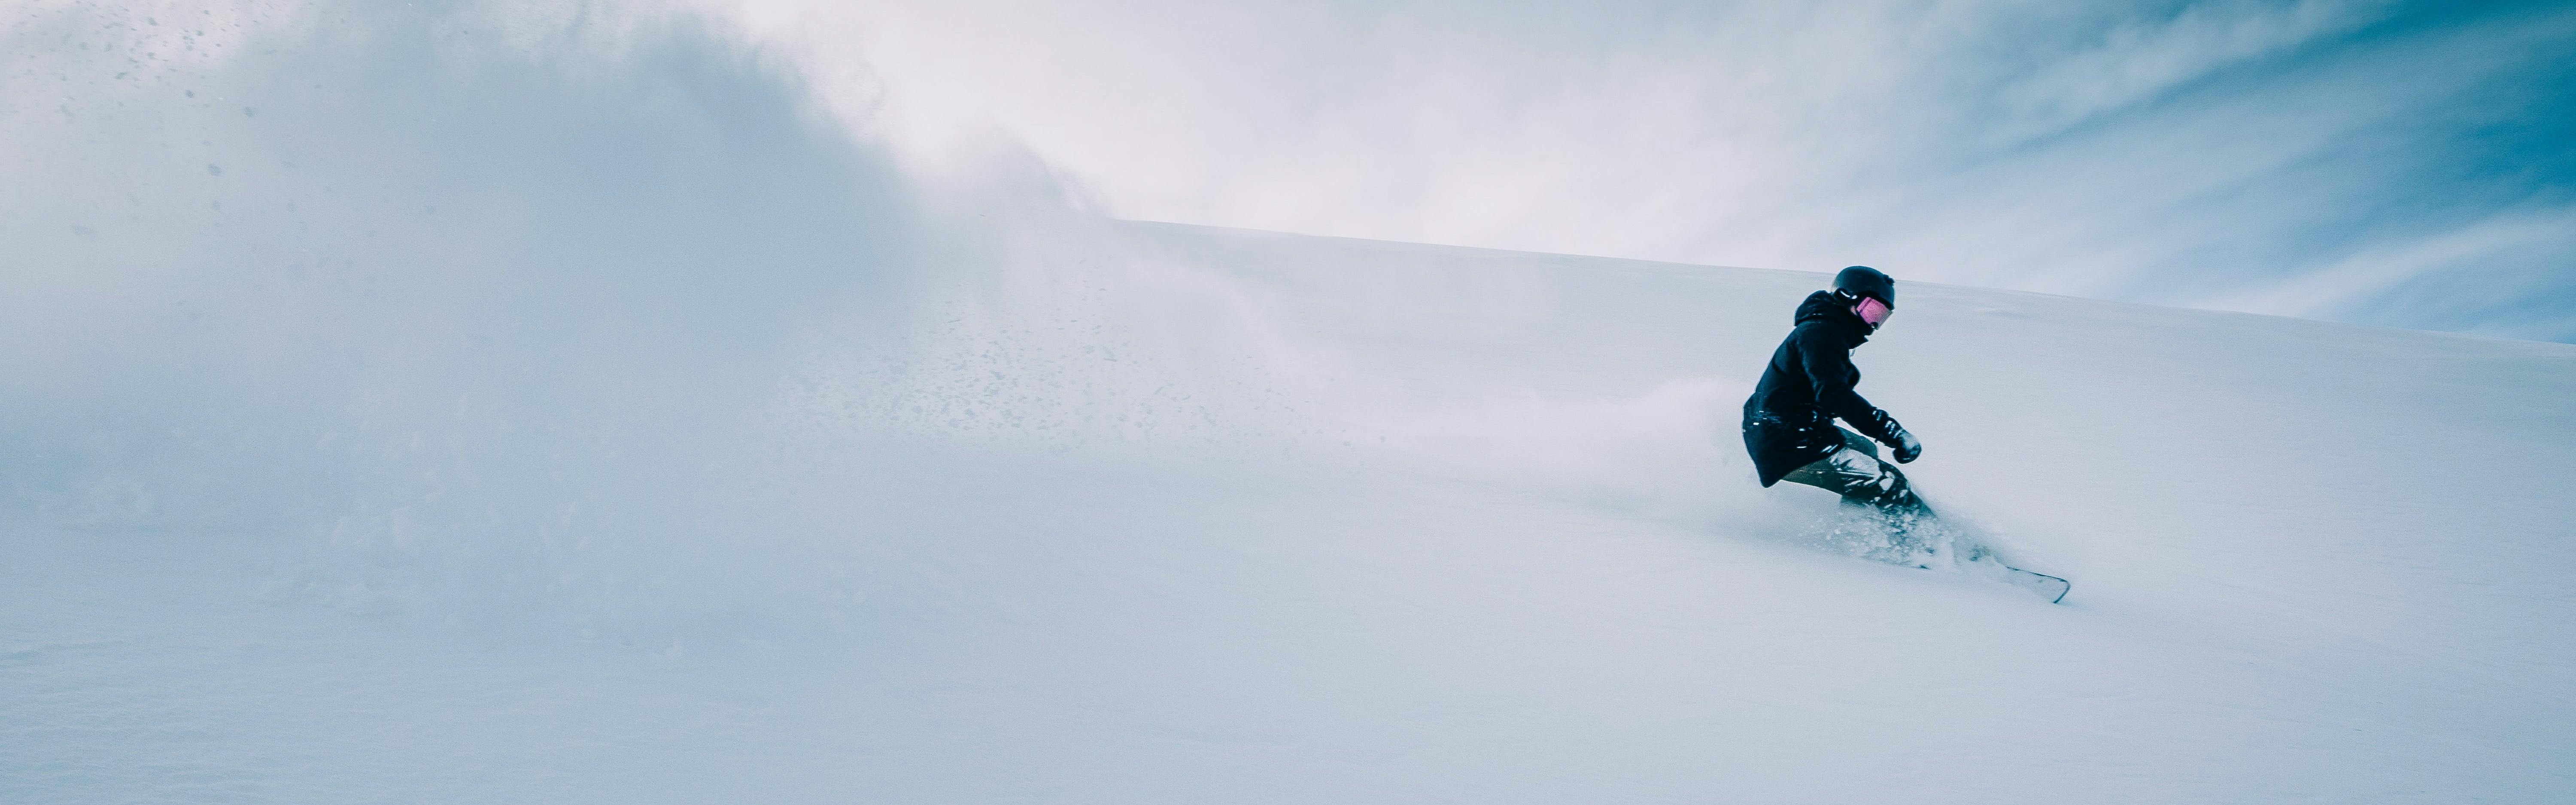 A snowboarder turning down a powdery slope. 